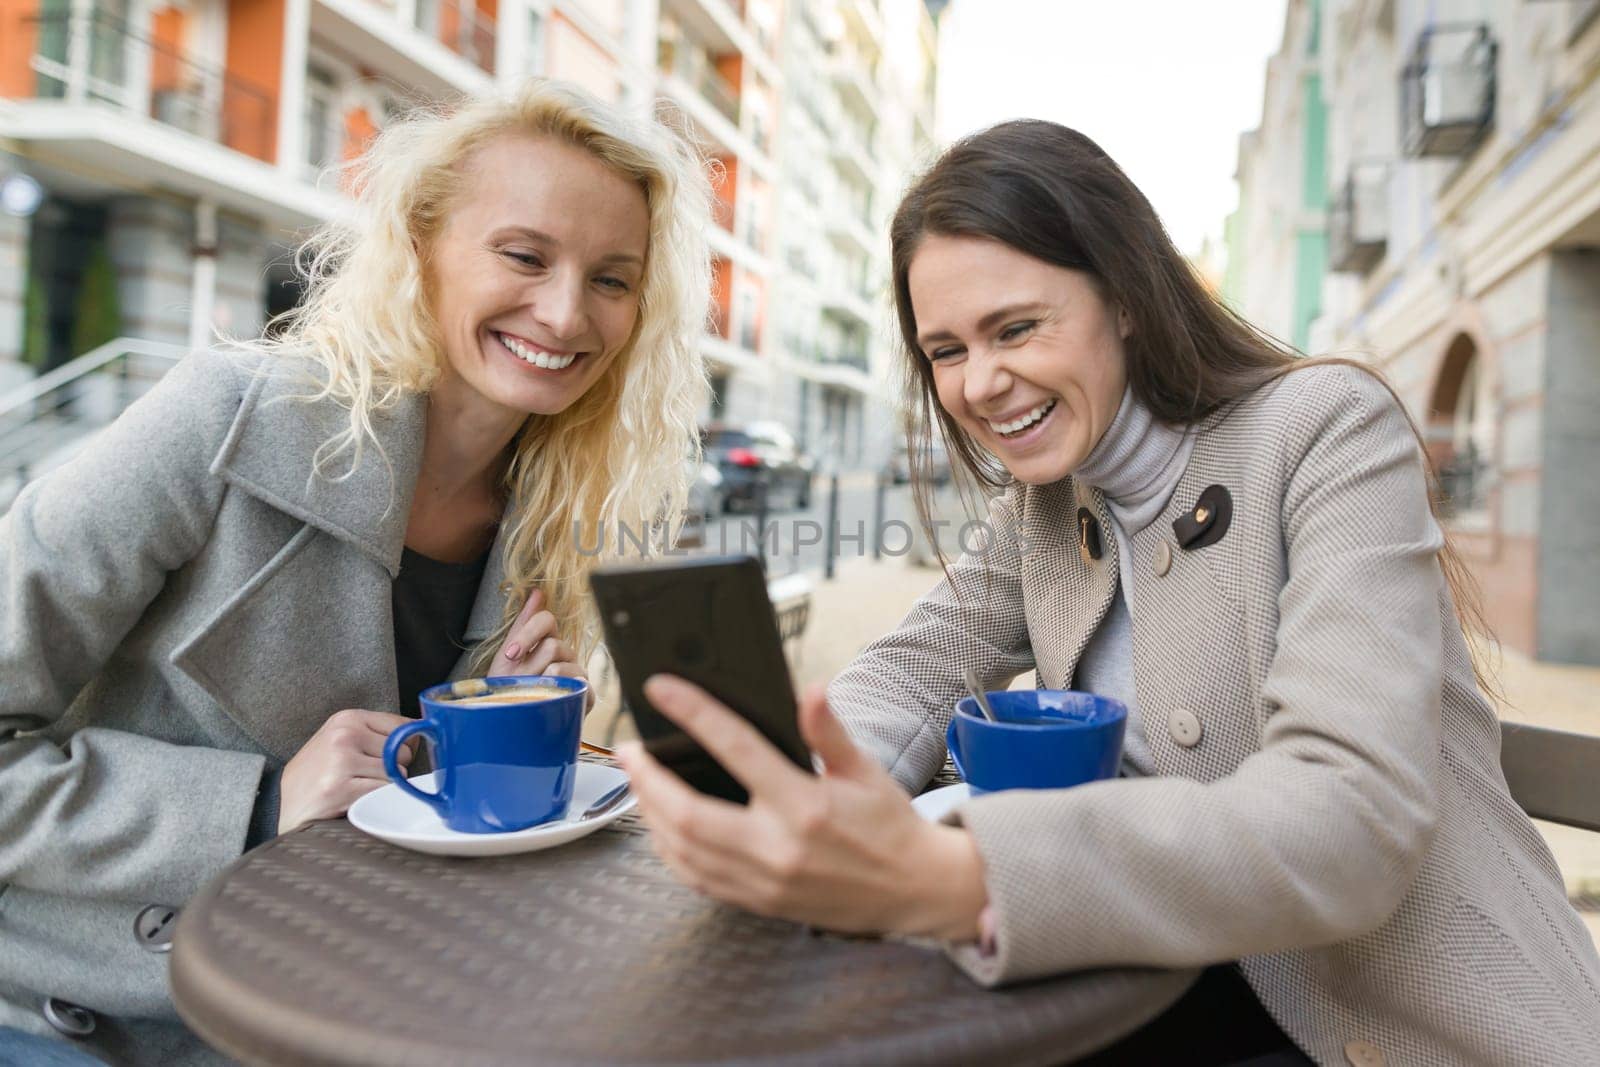 Two young smiling women having fun in outdoor cafe. Urban autumn background.